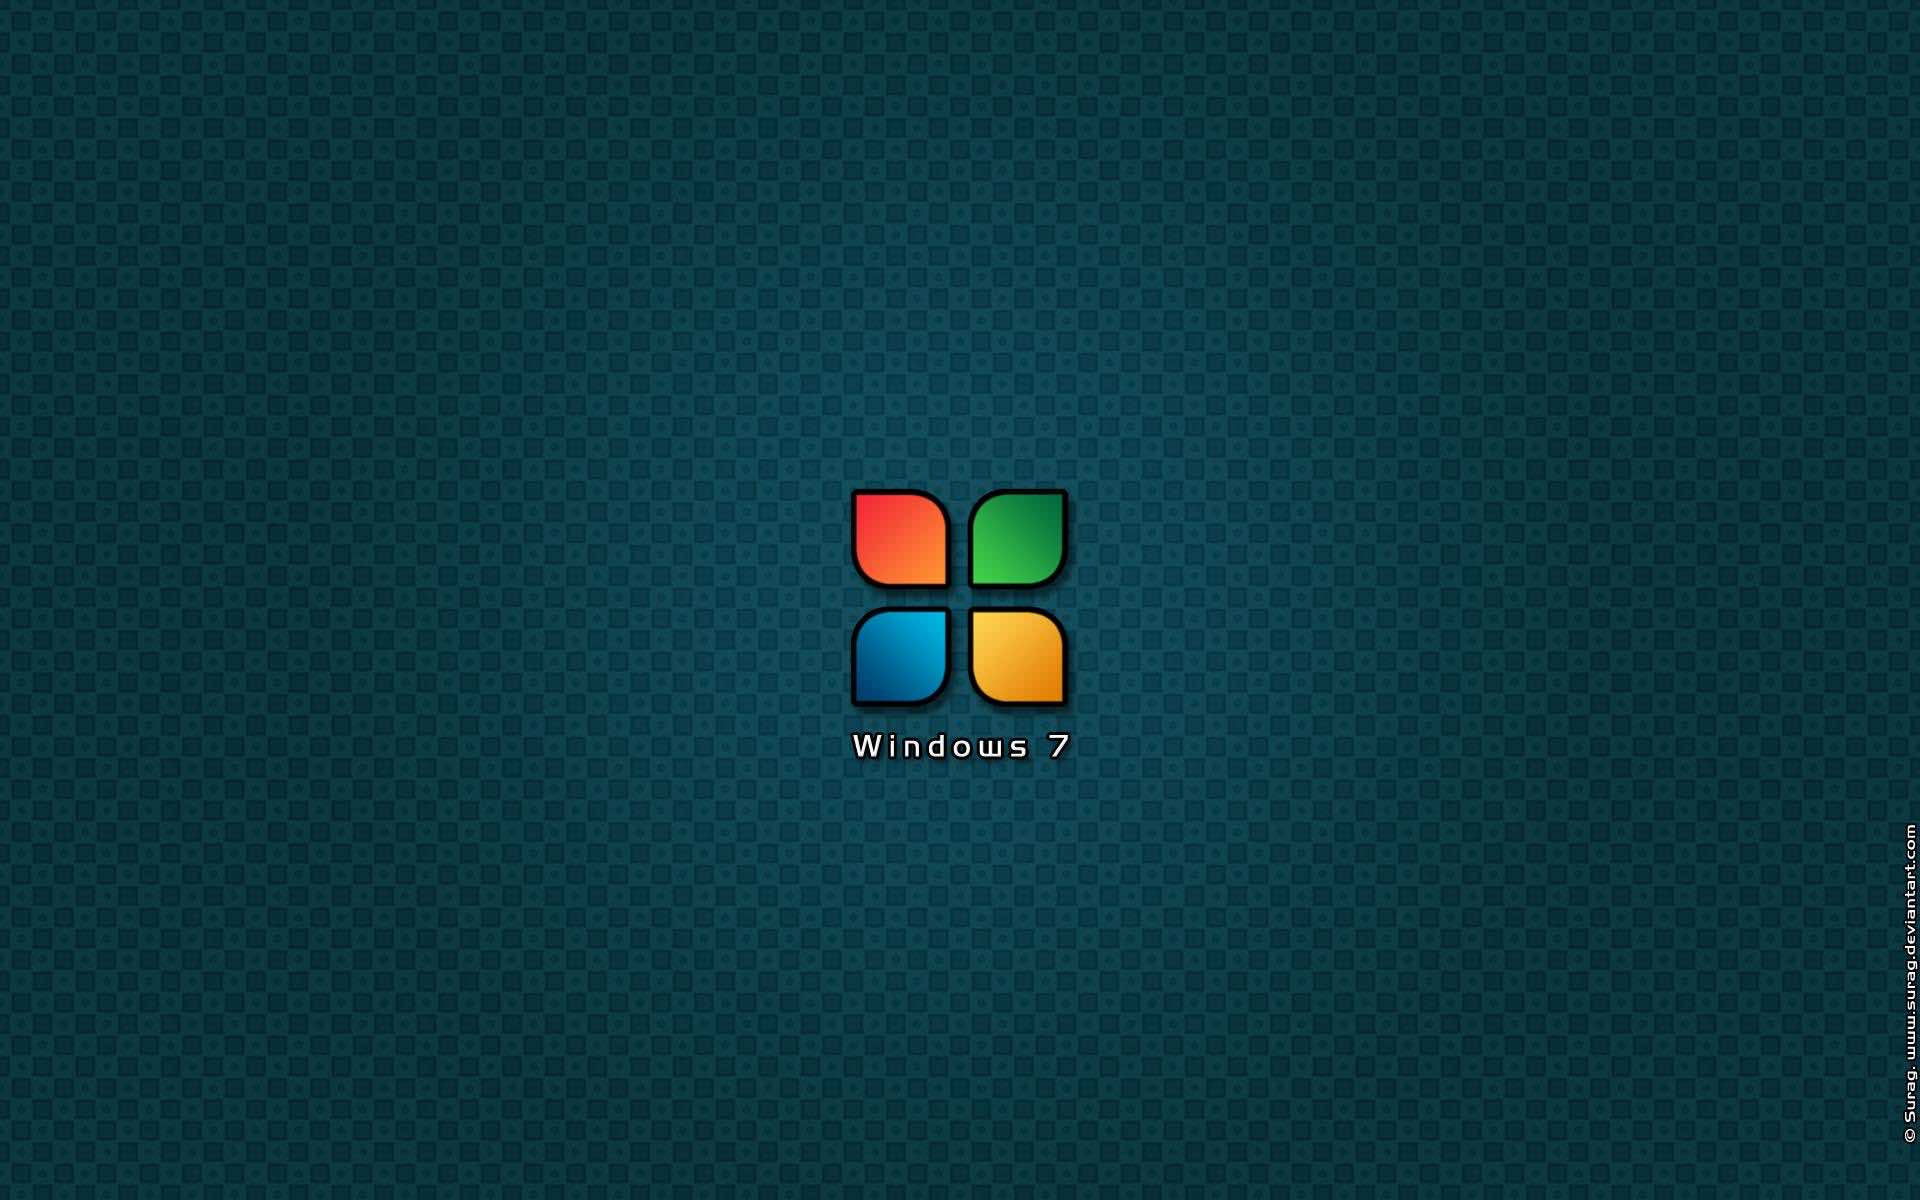 57 Free Hd Windows 7 Wallpapers For Download